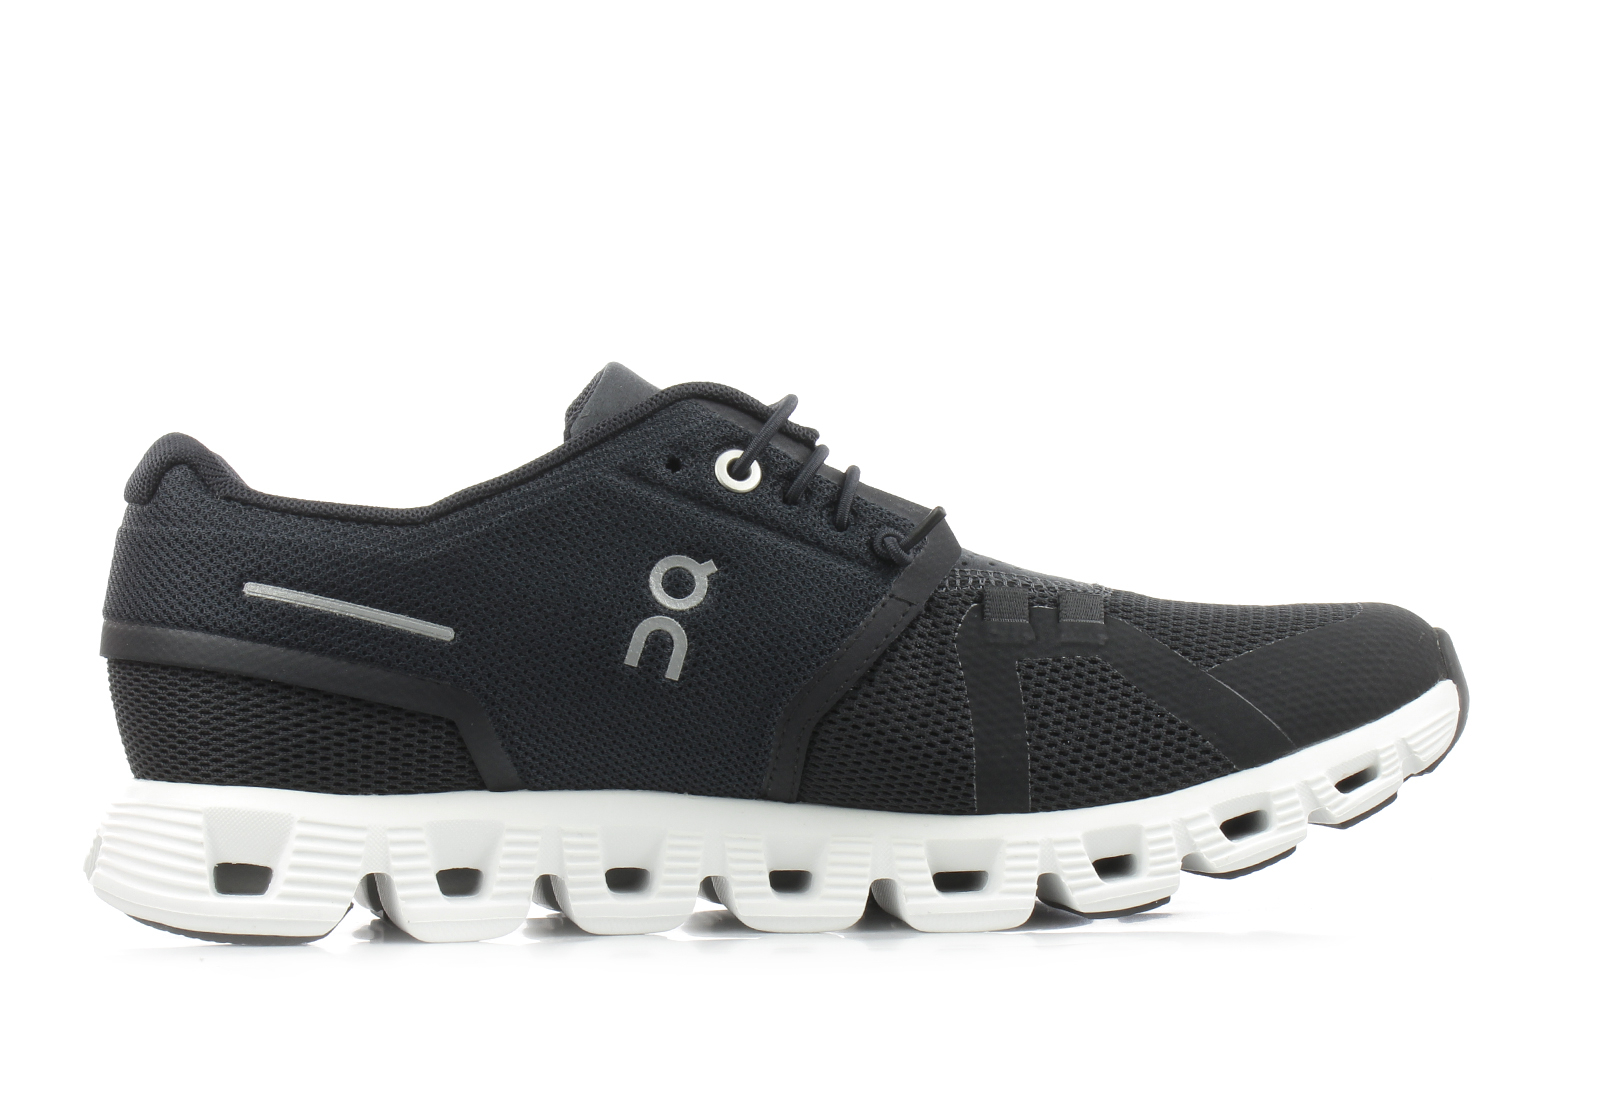 On Sneakers - Cloud 5 - 59-98904-BLK - Online shop for sneakers, shoes ...